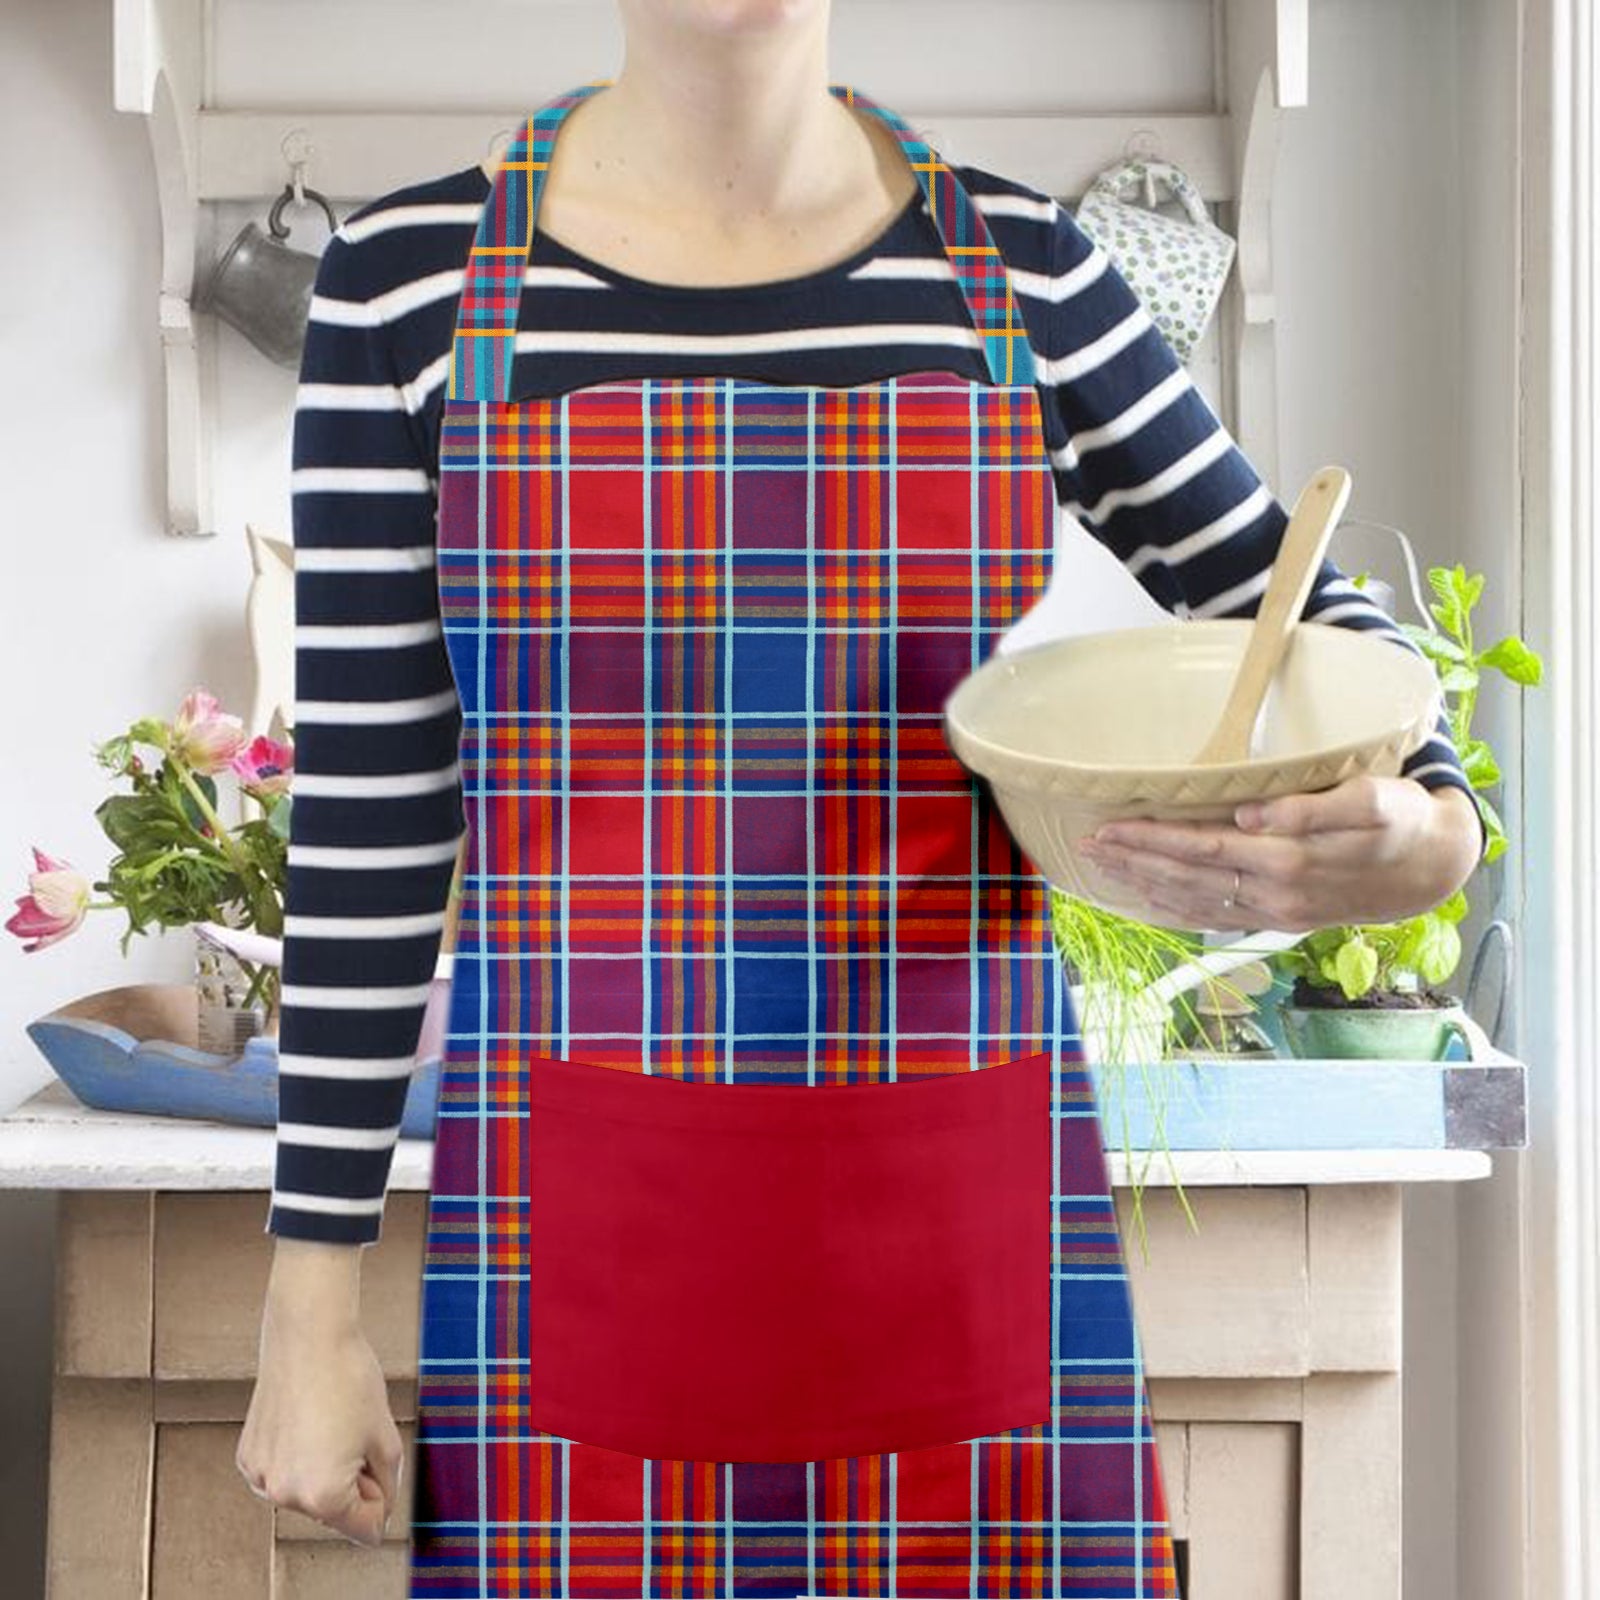 Lushomes Apron for Women, Red Checks Kitchen Apron for Men, Cooking Apron, apron for kitchen, kitchen dress for cooking,  Adjustable Buckle and Solid Pocket, Size 60x80 cms, Pkof1